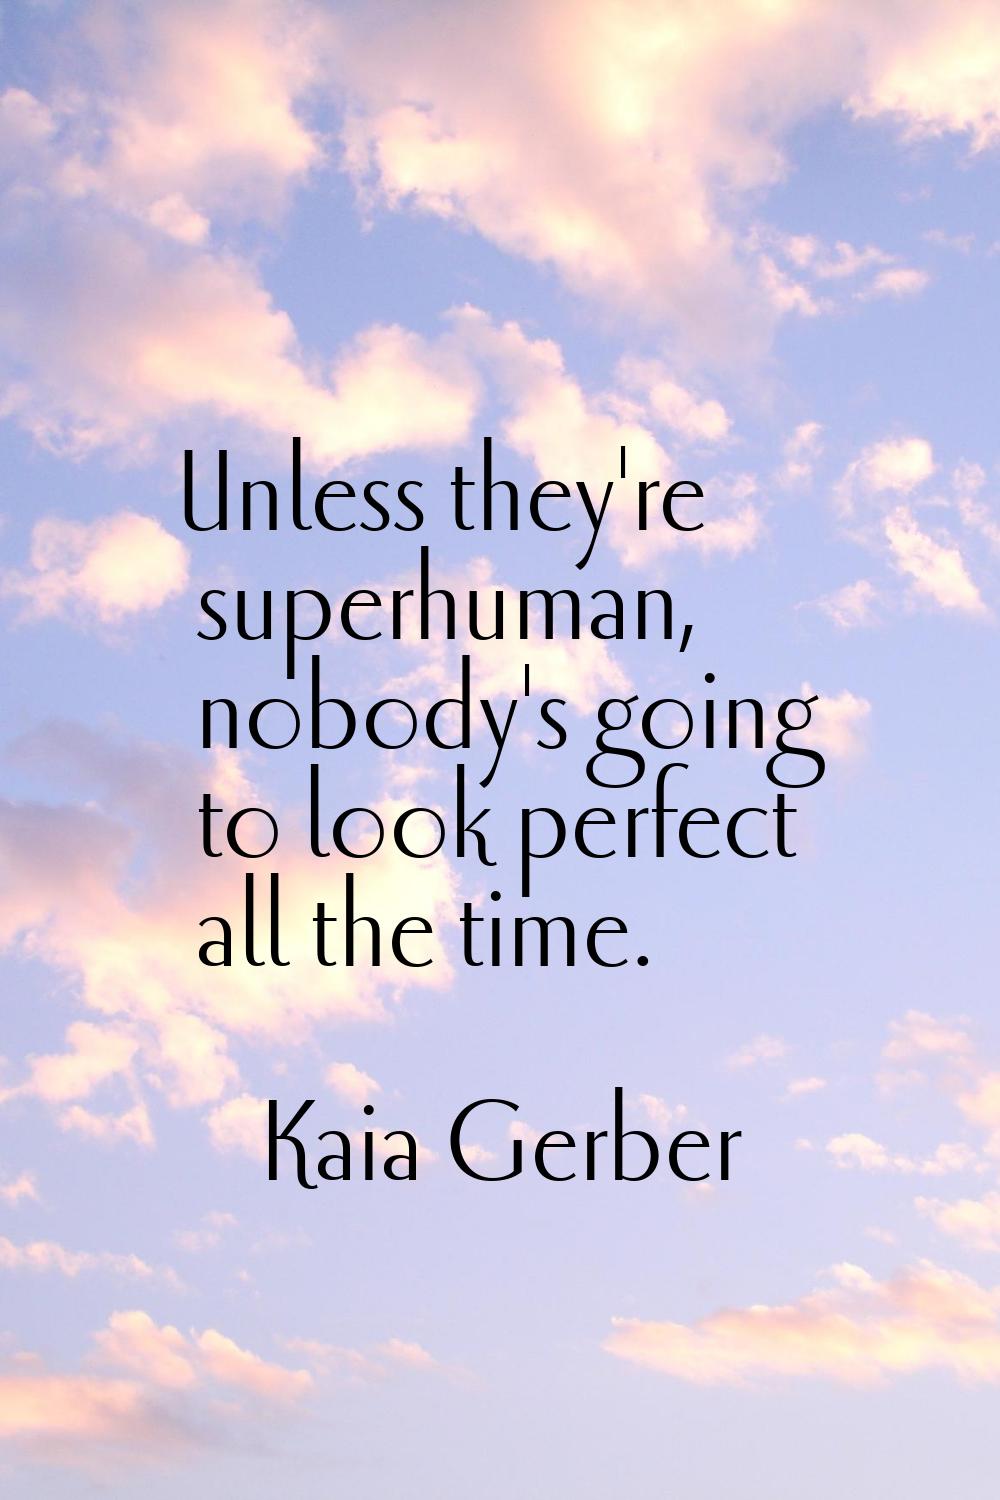 Unless they're superhuman, nobody's going to look perfect all the time.